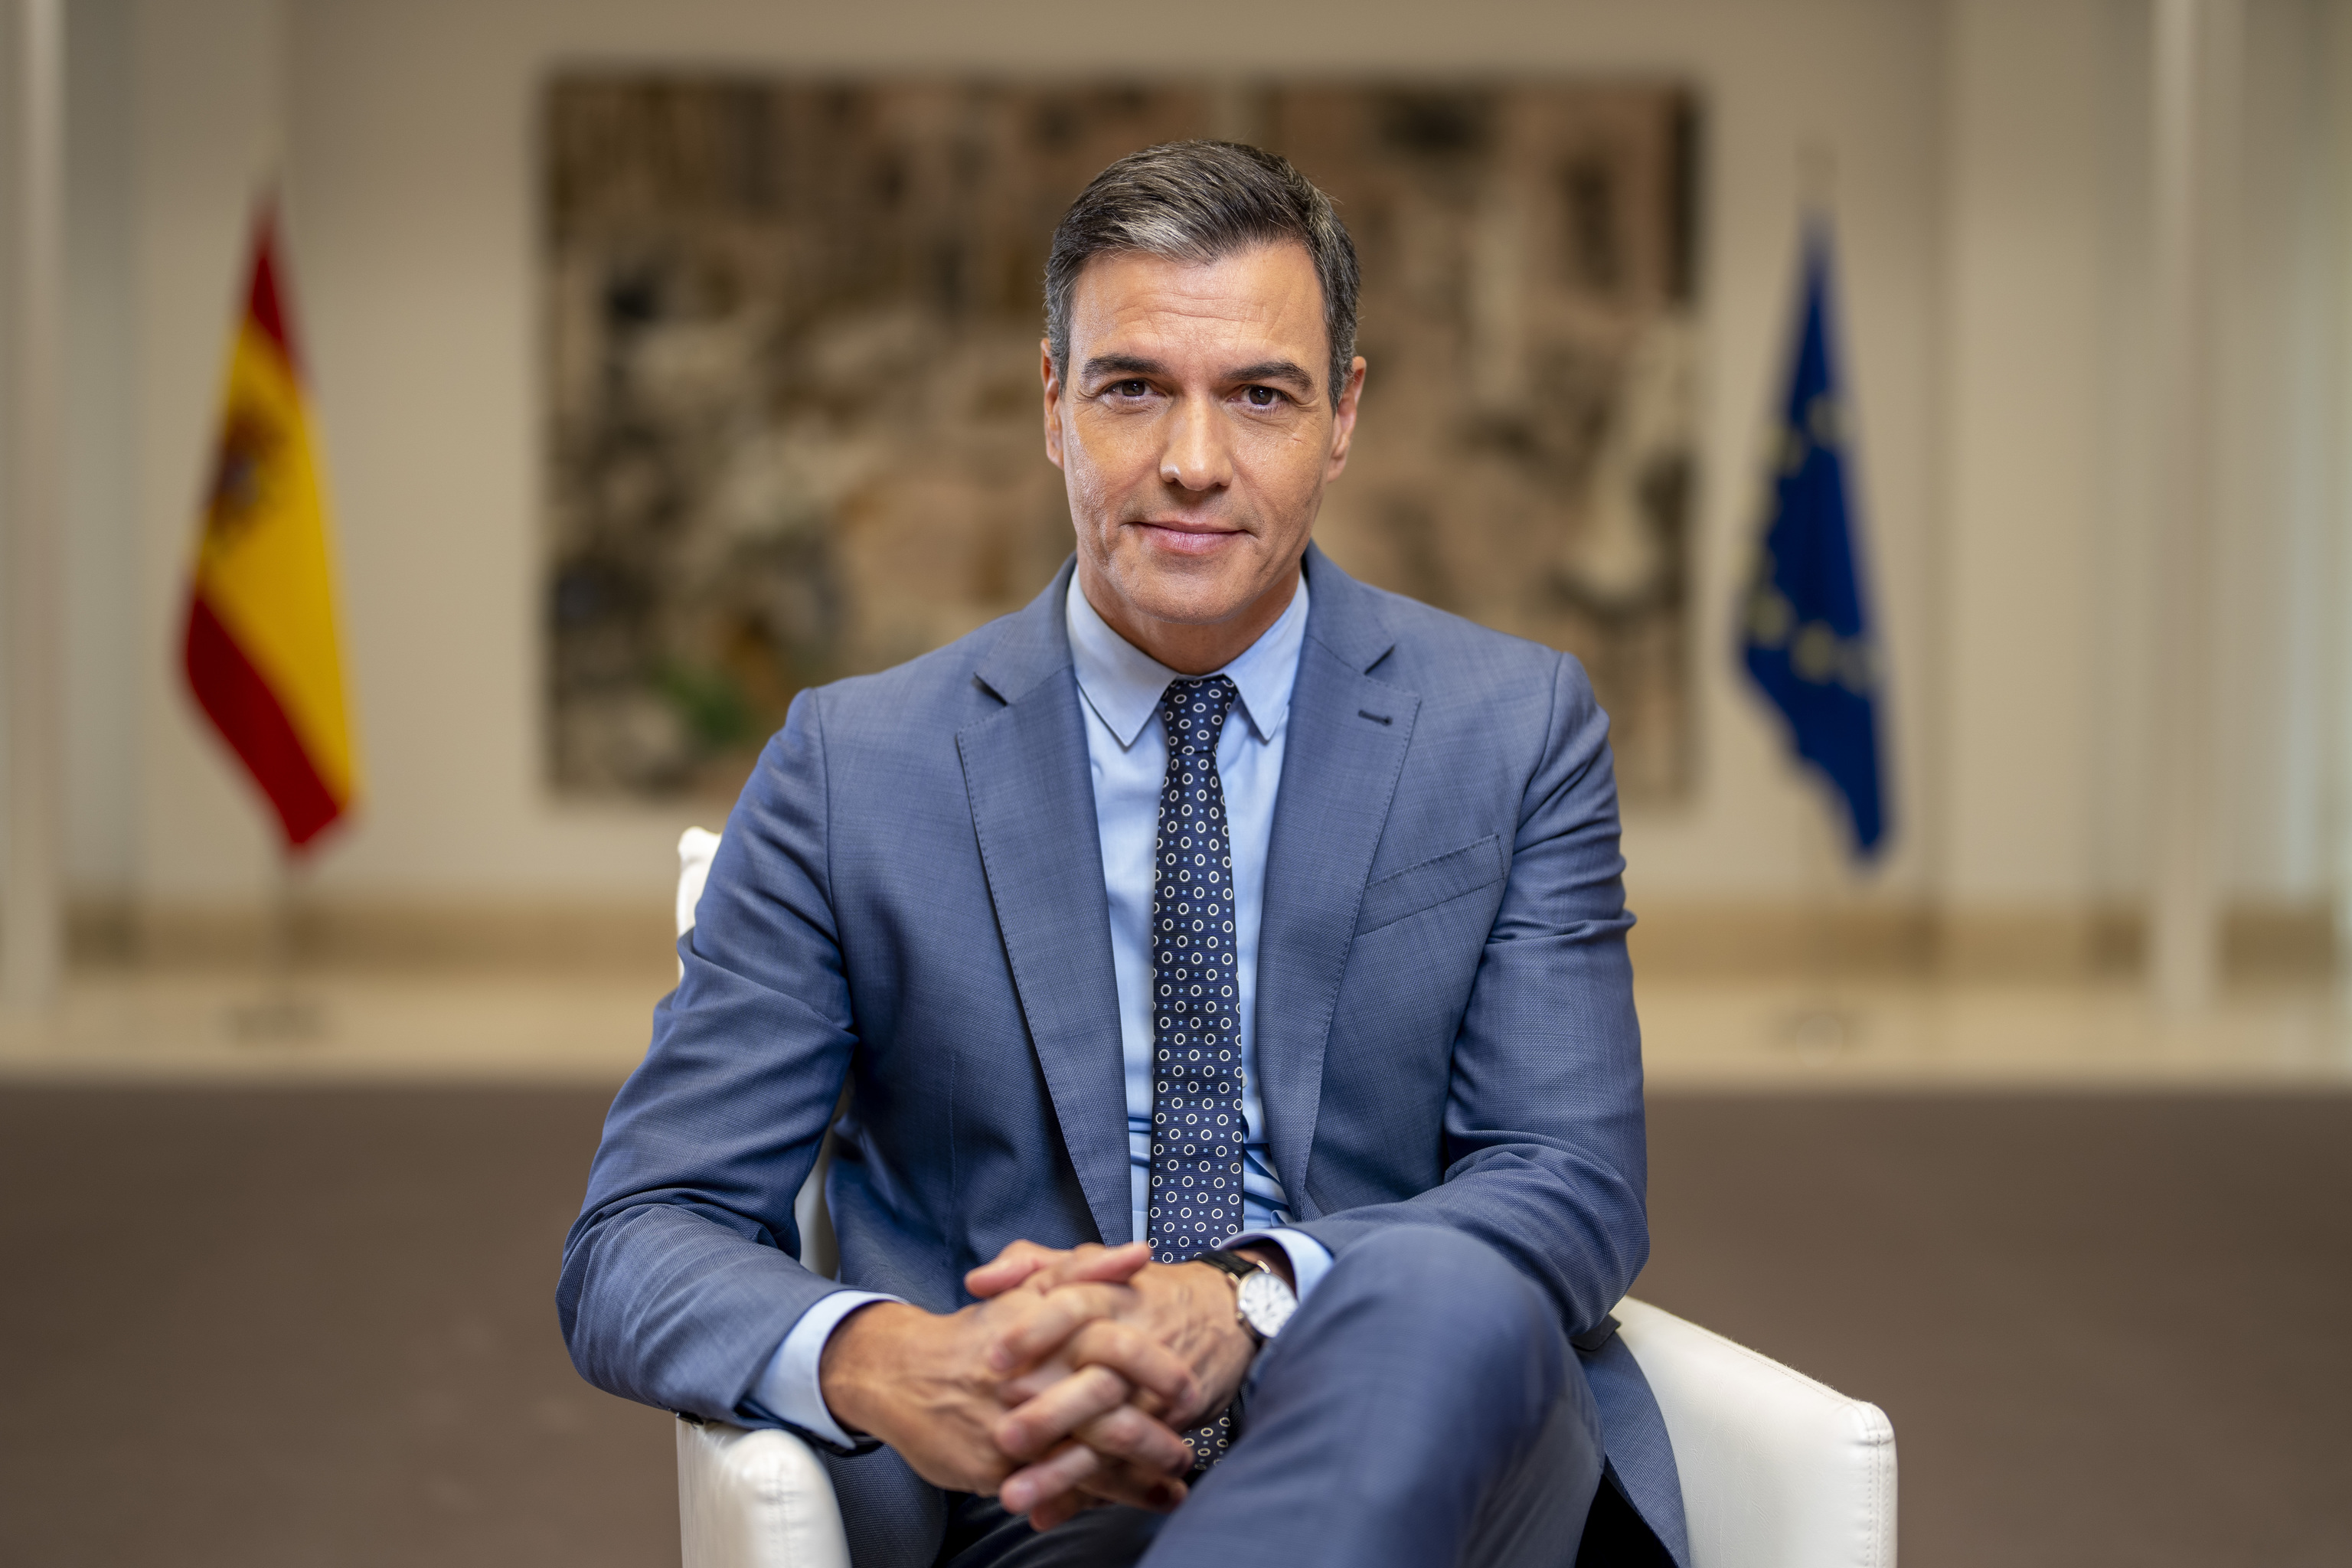 FILE - Spain's Prime Minister  lt;HIT gt;Pedro lt;/HIT gt;  lt;HIT gt;Sanchez lt;/HIT gt; poses for a portrait after an interview with The Associated Press at the Moncloa Palace in Madrid, Spain, June 27, 2022. Spanish Prime Minister  lt;HIT gt;Pedro lt;/HIT gt;  lt;HIT gt;Snchez lt;/HIT gt; says that he will consider resigning after what he calls "spurious corruption allegations against his wife led to a judicial investigation being opened on April 24, 2024.  lt;HIT gt;Snchez lt;/HIT gt; said in a letter posted on his X account that while the allegations against his wife Begoa Gmez are false, he is canceling his public agenda until Monday when he announce whether he will continue or step down. (AP Photo/Bernat Armangue, File)